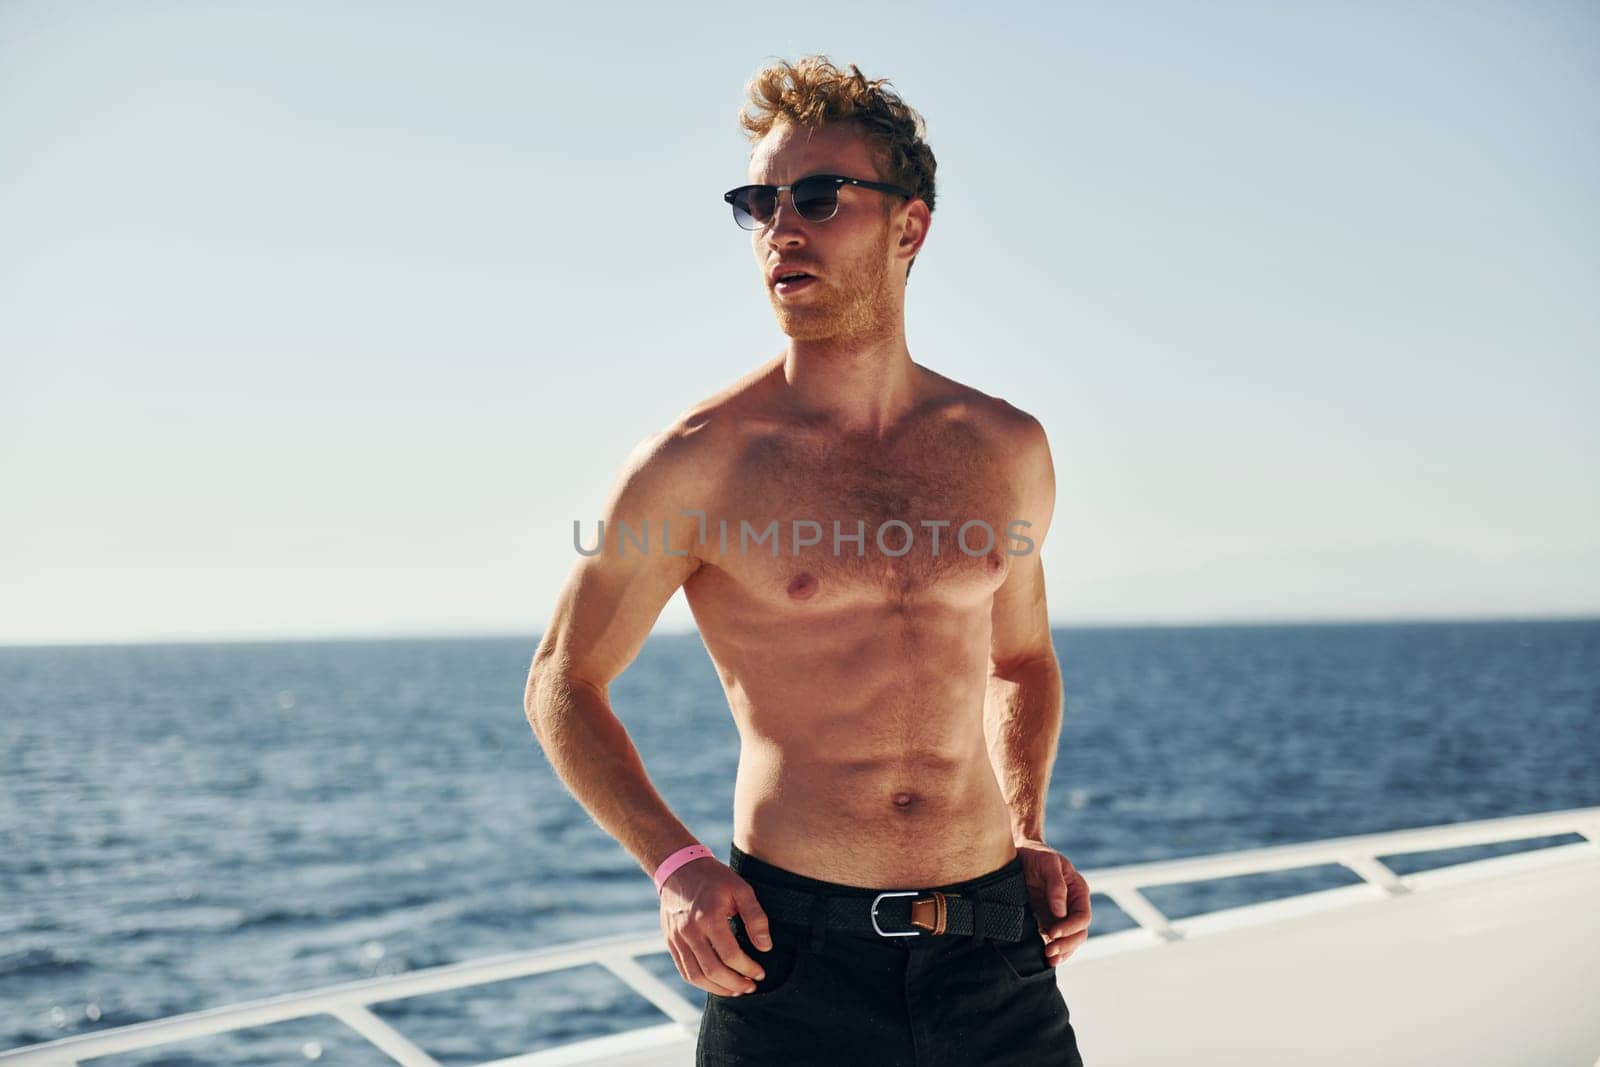 In sunglasses. Young male tourist is on the yacht on the sea. Conception of vacation.